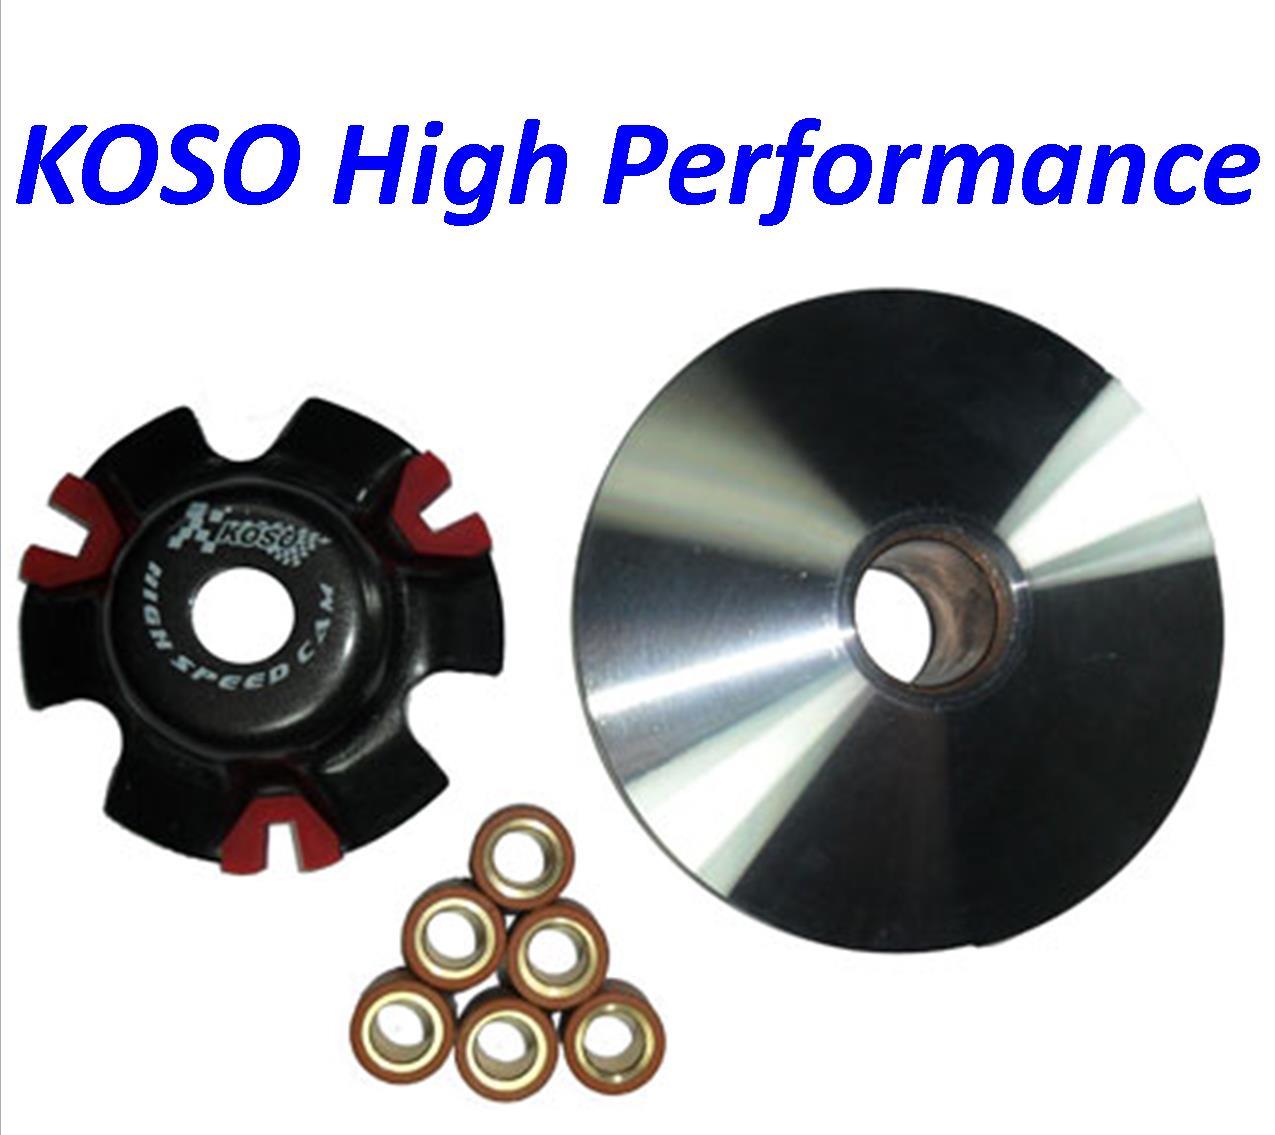 VARIATOR KIT KOSO Brand (HIGH PERFORMANCE) GY6-125,149,180cc Scooters-ATVs-GoKarts Shaft=15 OD=115mm - Click Image to Close